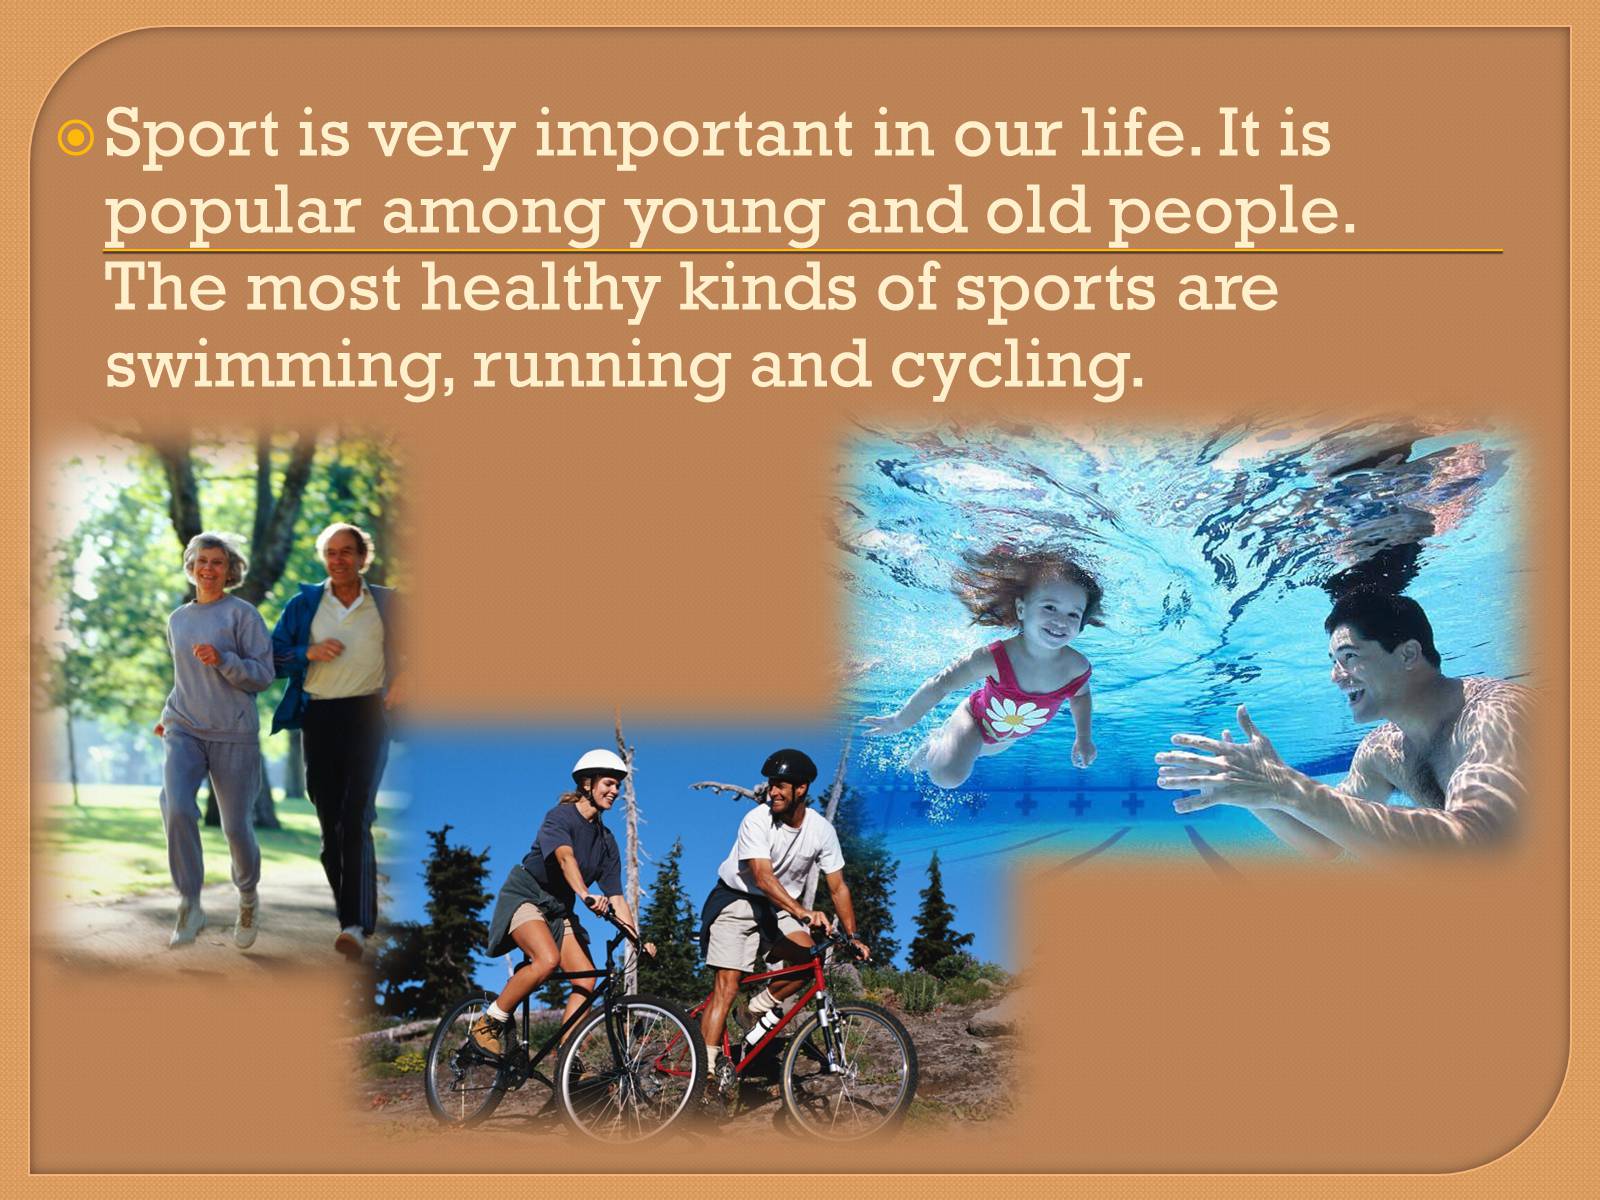 Sports in my life. Презентация на тему Sport and healthy Lifestyle. Healthy Lifestyle презентация. Sports in our Life презентация. Sport in our Life презентация.